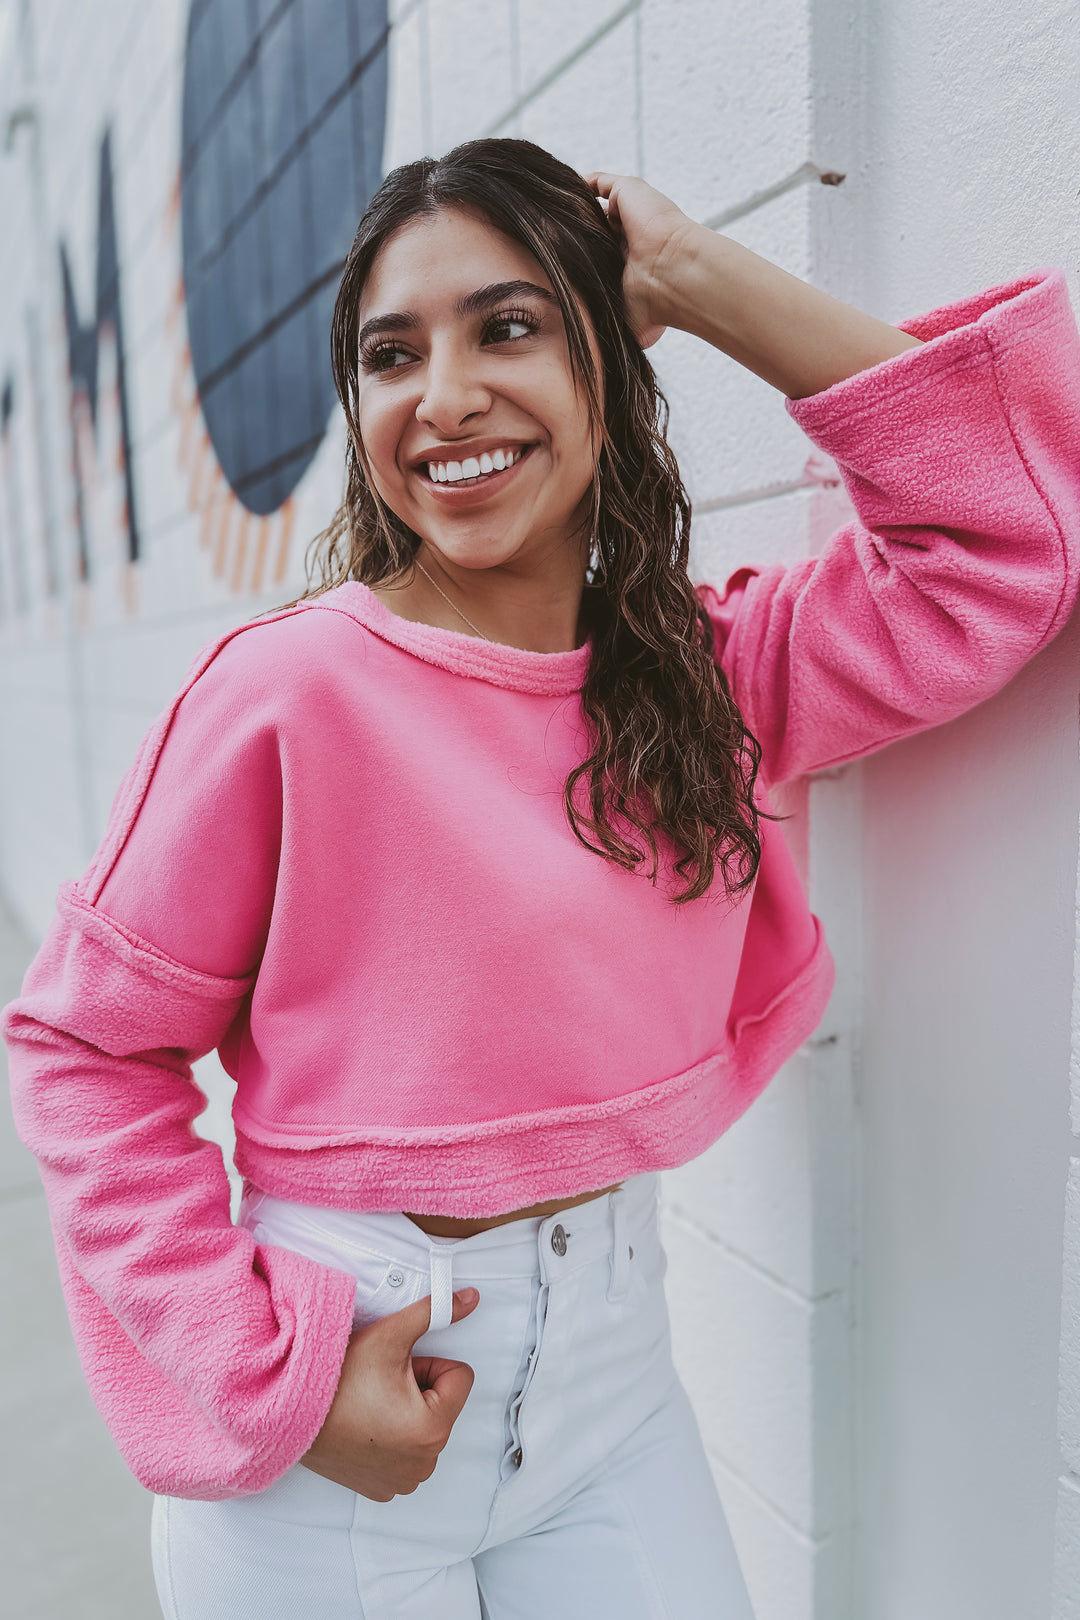 The Hey Barbie Bright Pink French Terry Cropped Pullover